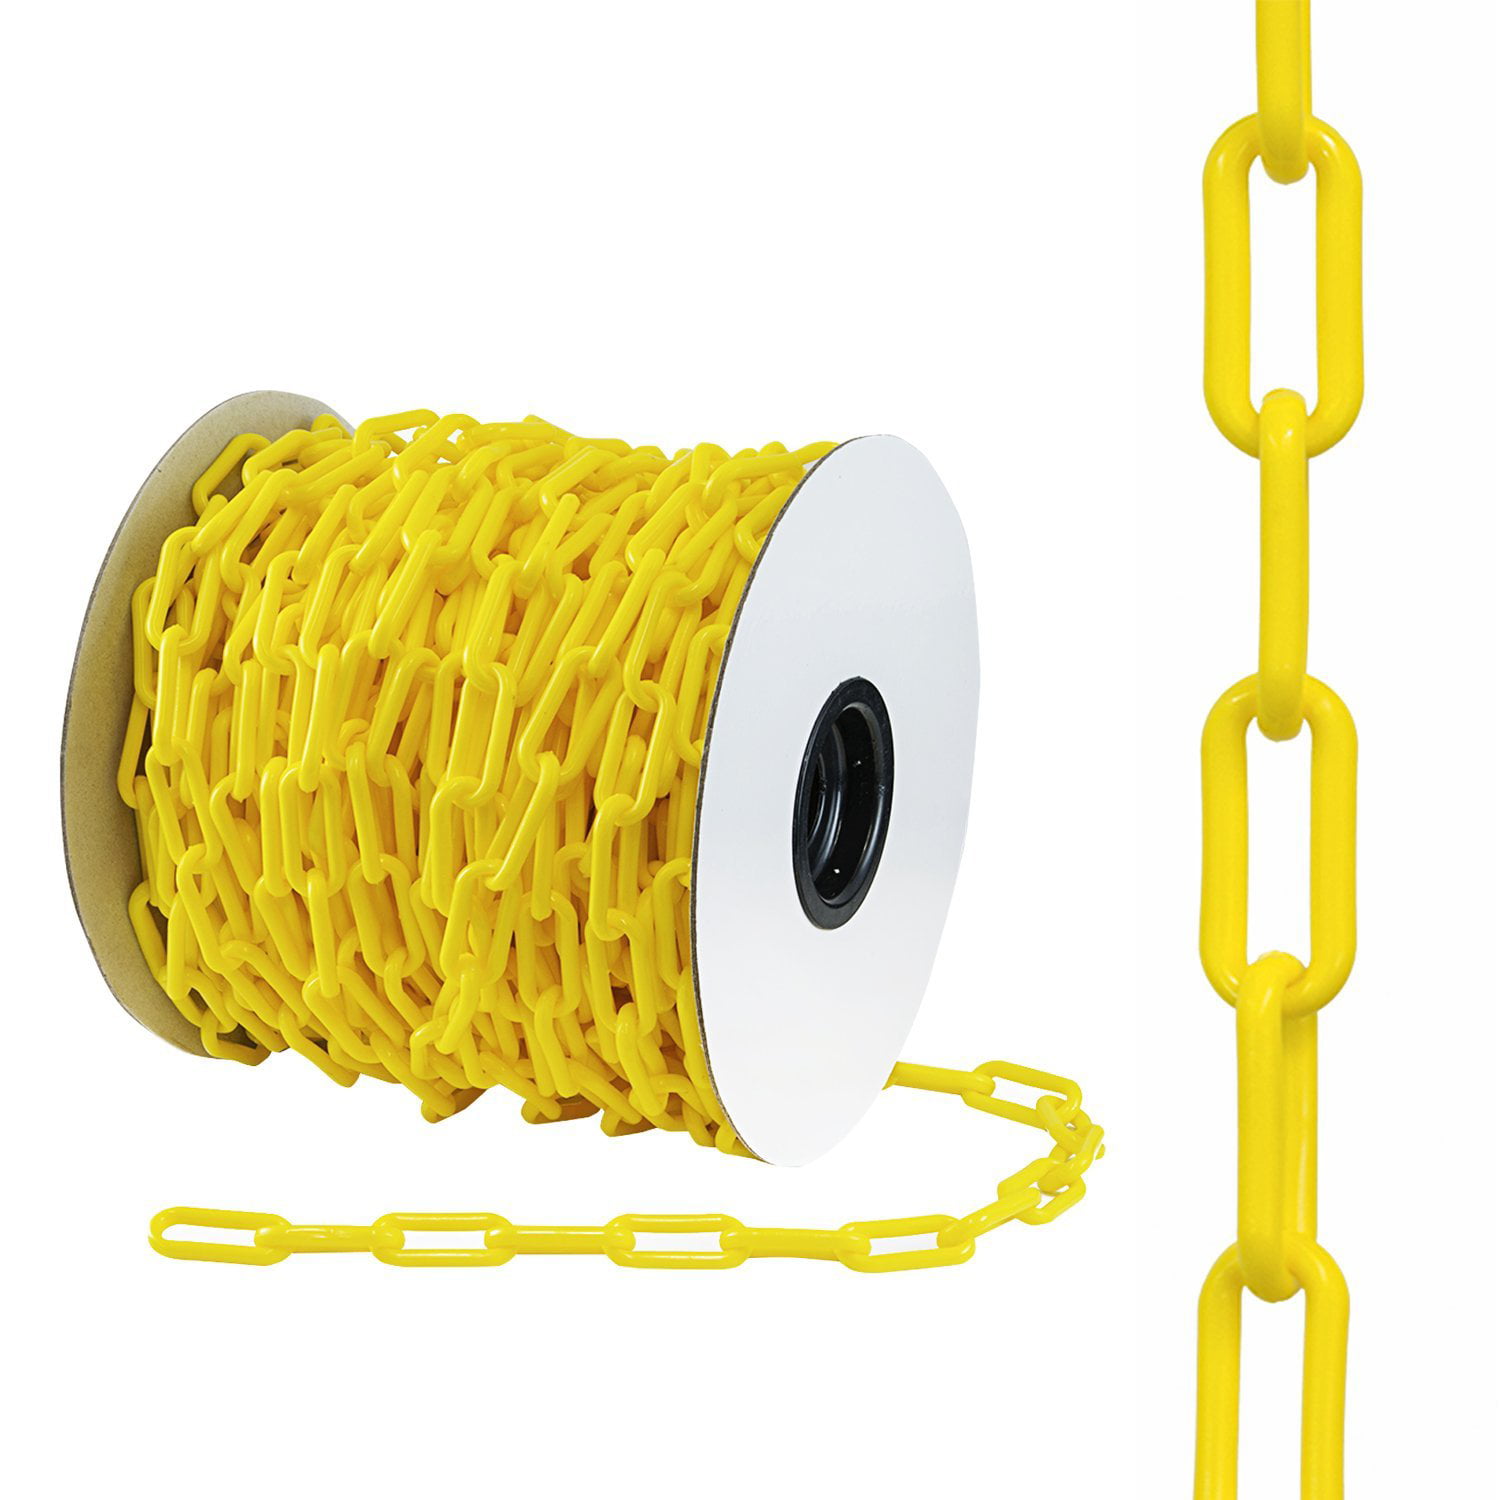 Houseables Plastic Chain, Safety Barrier, 125 Foot, 2